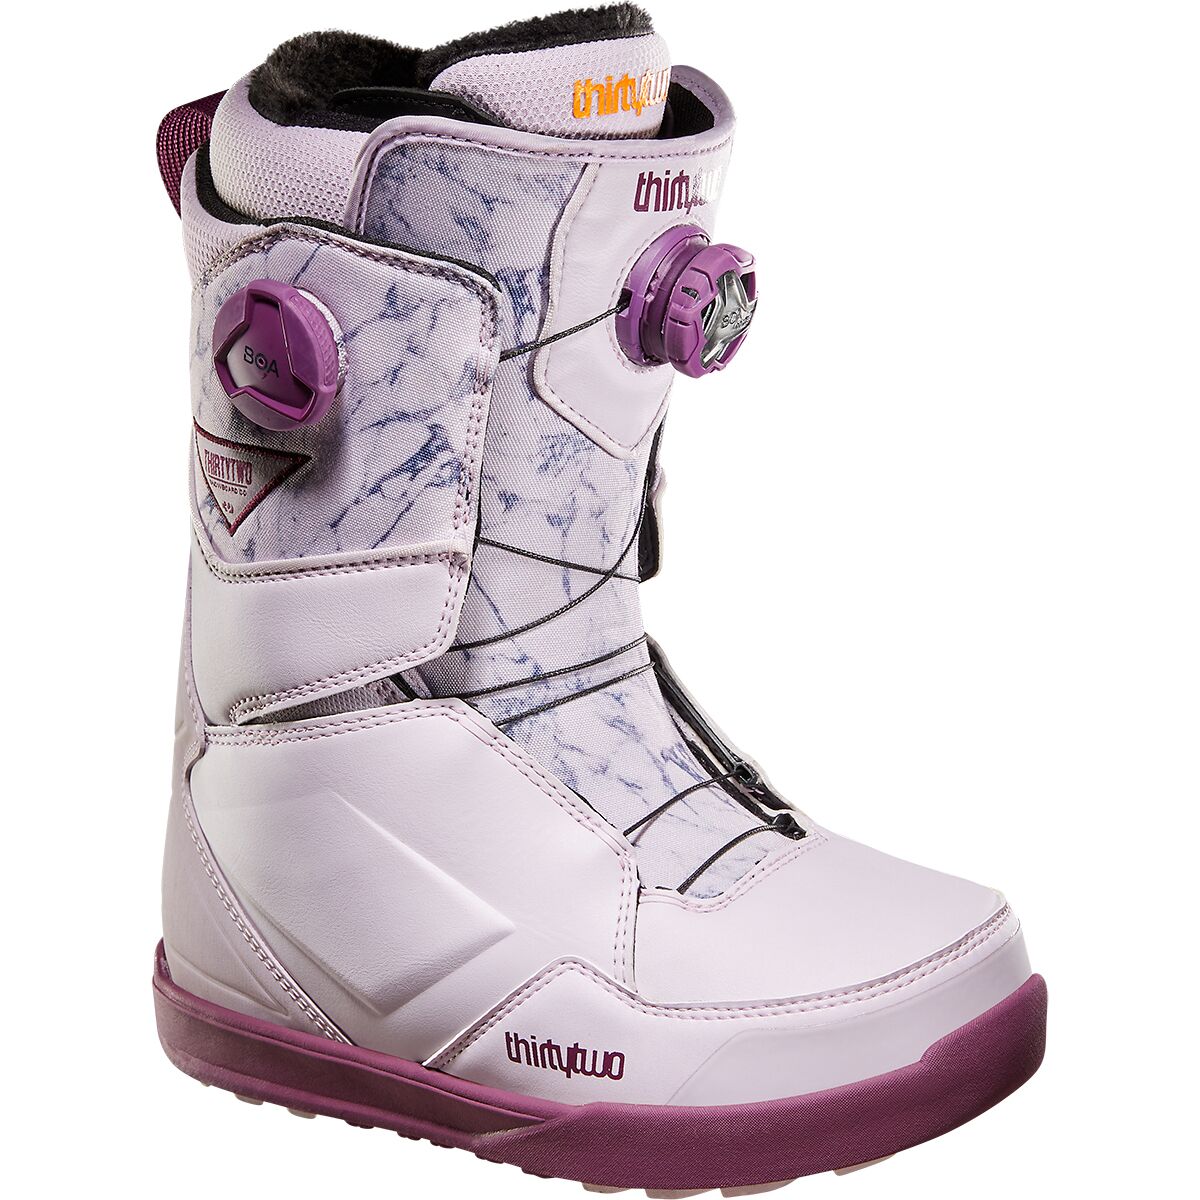 ThirtyTwo Lashed Double BOA Snowboard Boot - 2023 - Women's Lavender